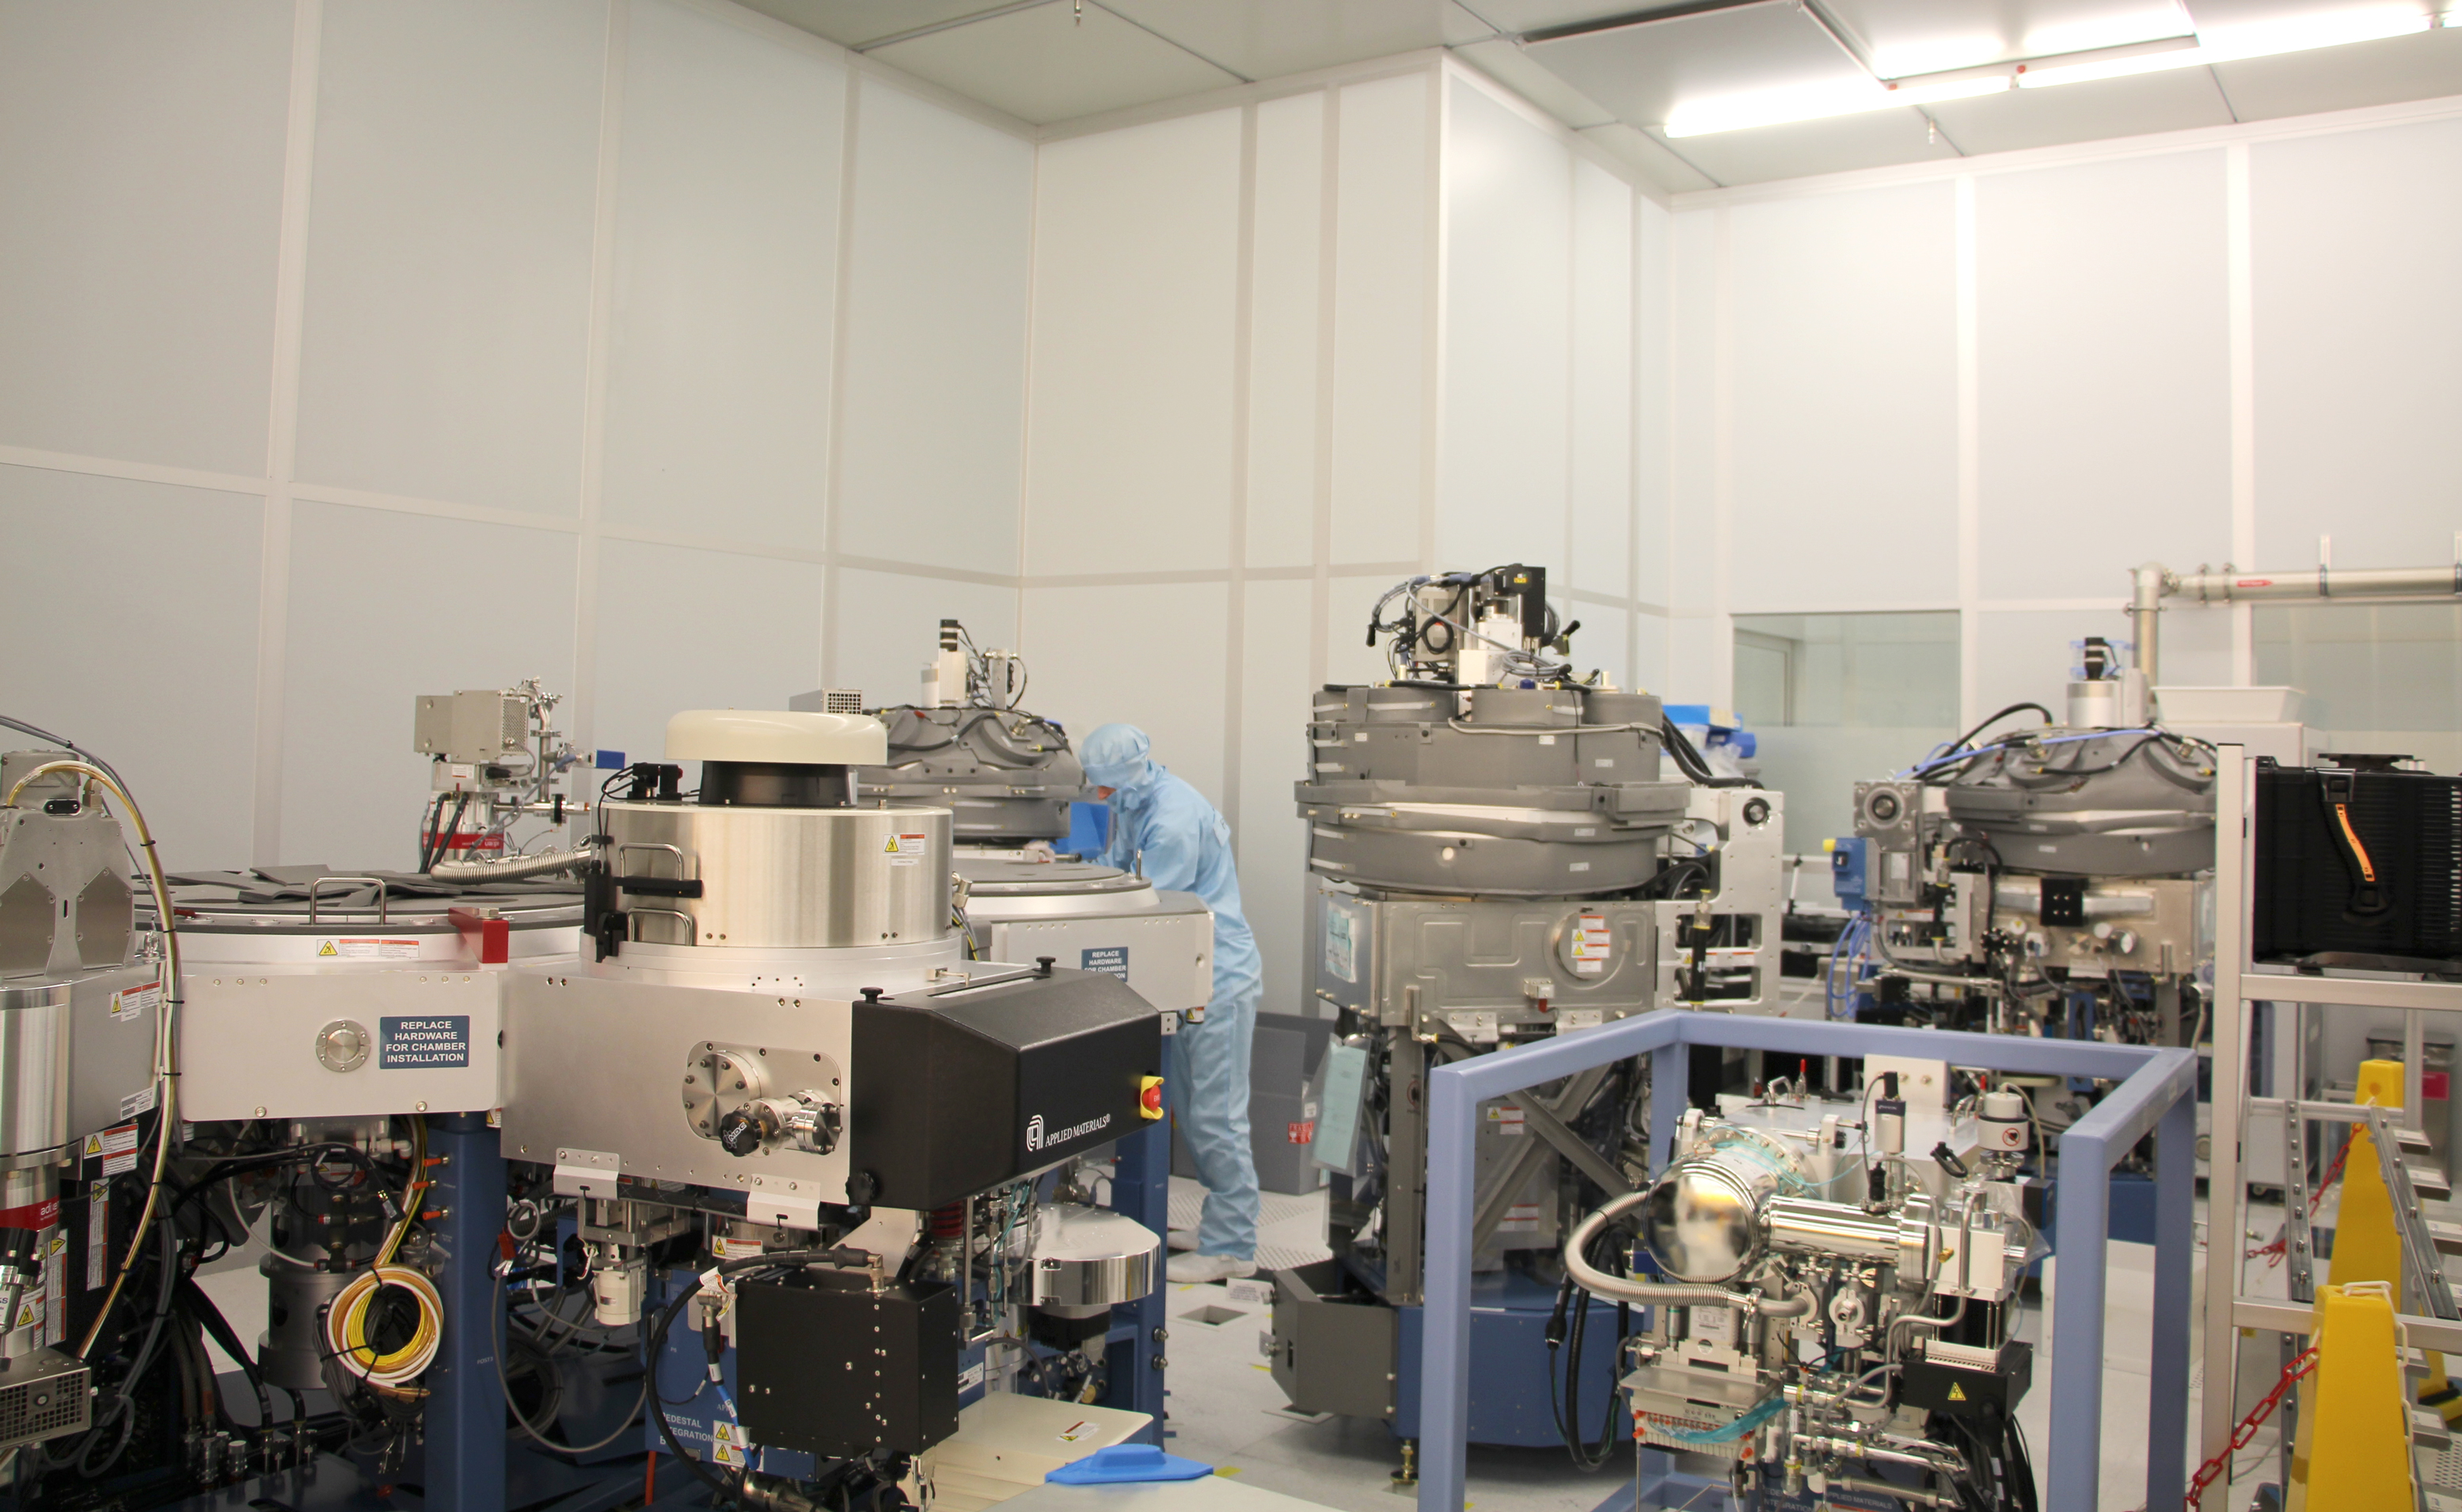 Installation of PVD cluster system by Applied Materials in 300 mm cleanroom at Fraunhofer IPMS